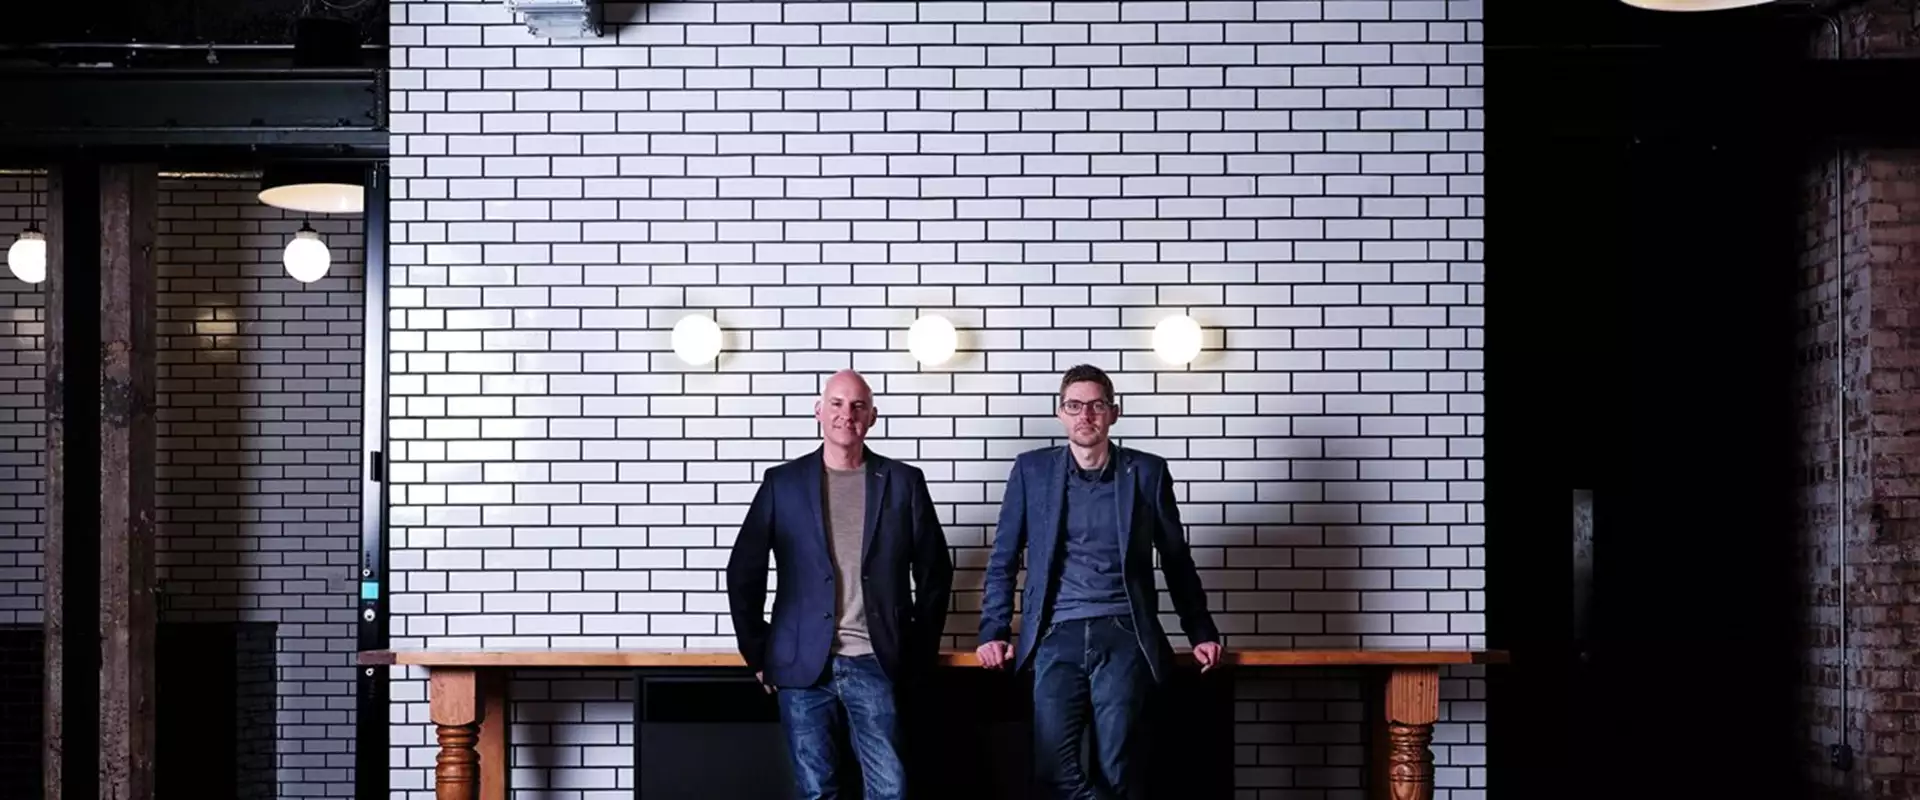 A Q&A with Mare Street Studios designers, Frost Architects - Header